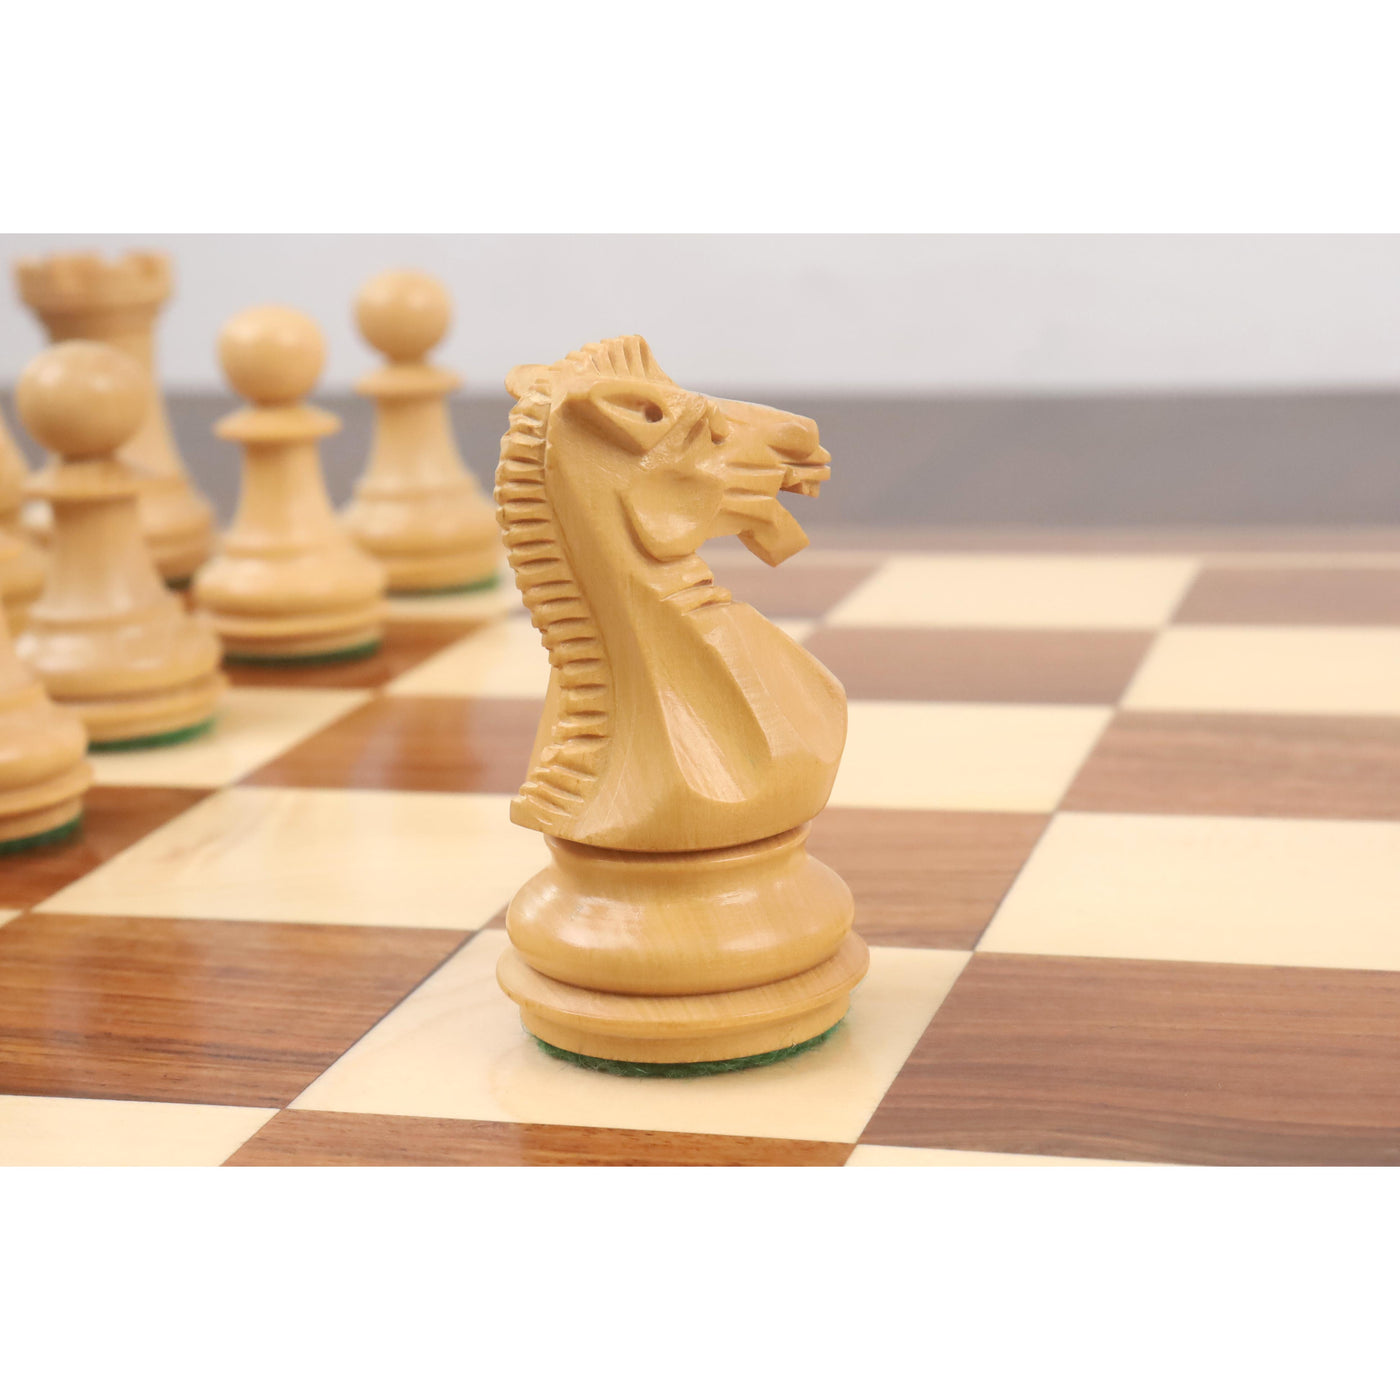 Slightly Imperfect 3.1" Chamfered Base Staunton Chess Set - Chess Pieces Only - Weighted Golden Rosewood